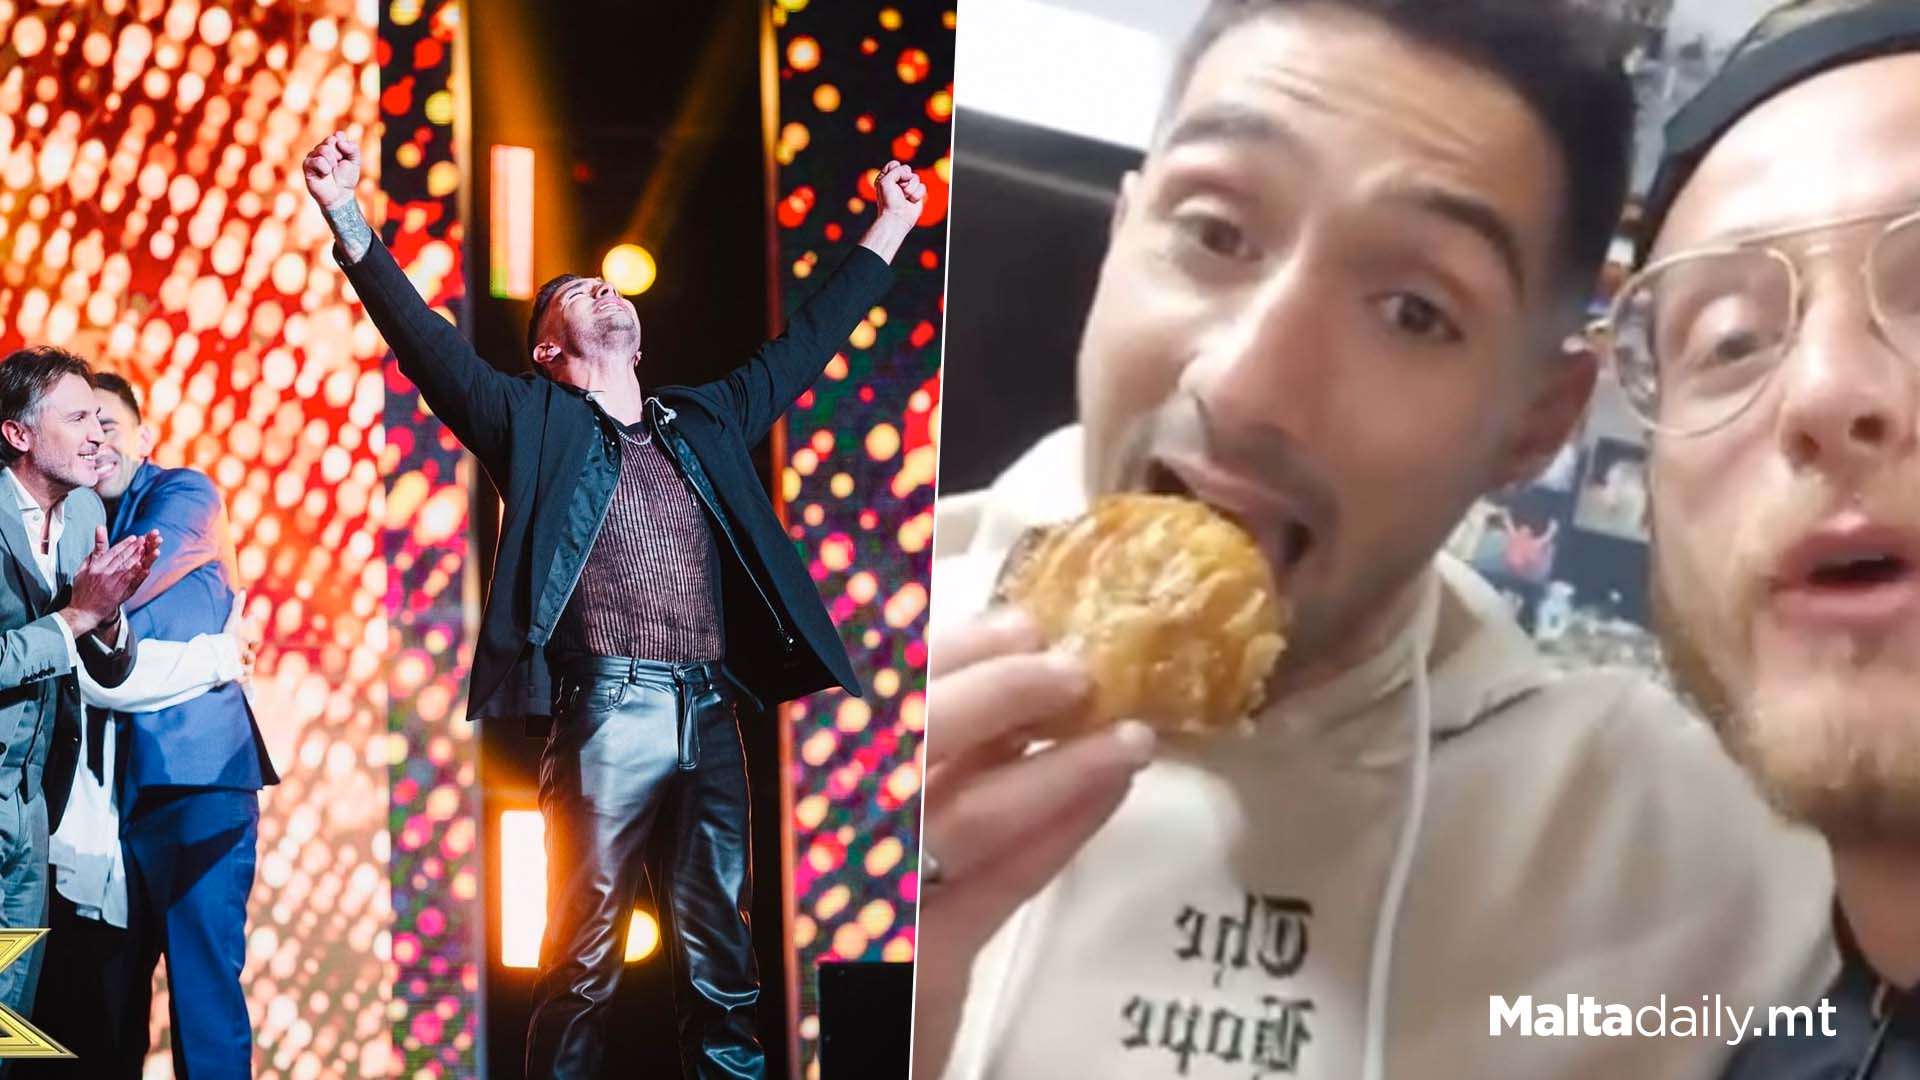 X Factor Winner Richard Heads For Pastizzi After Victory